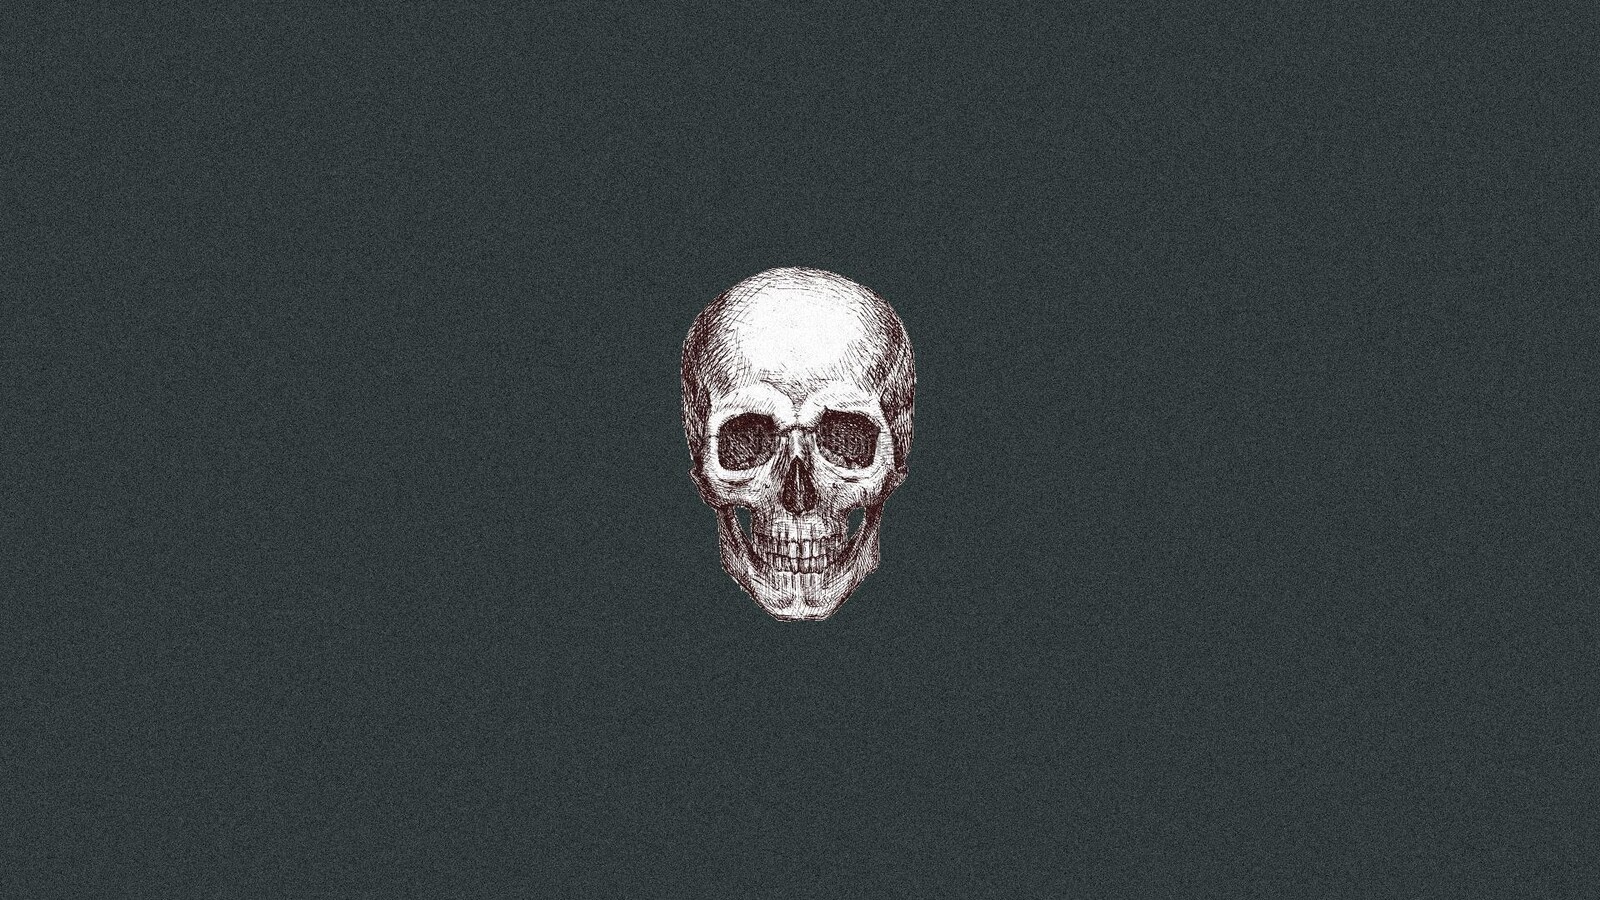 Skull Art 3 1600x900 Resolution HD 4k Wallpaper, Image, Background, Photo and Picture